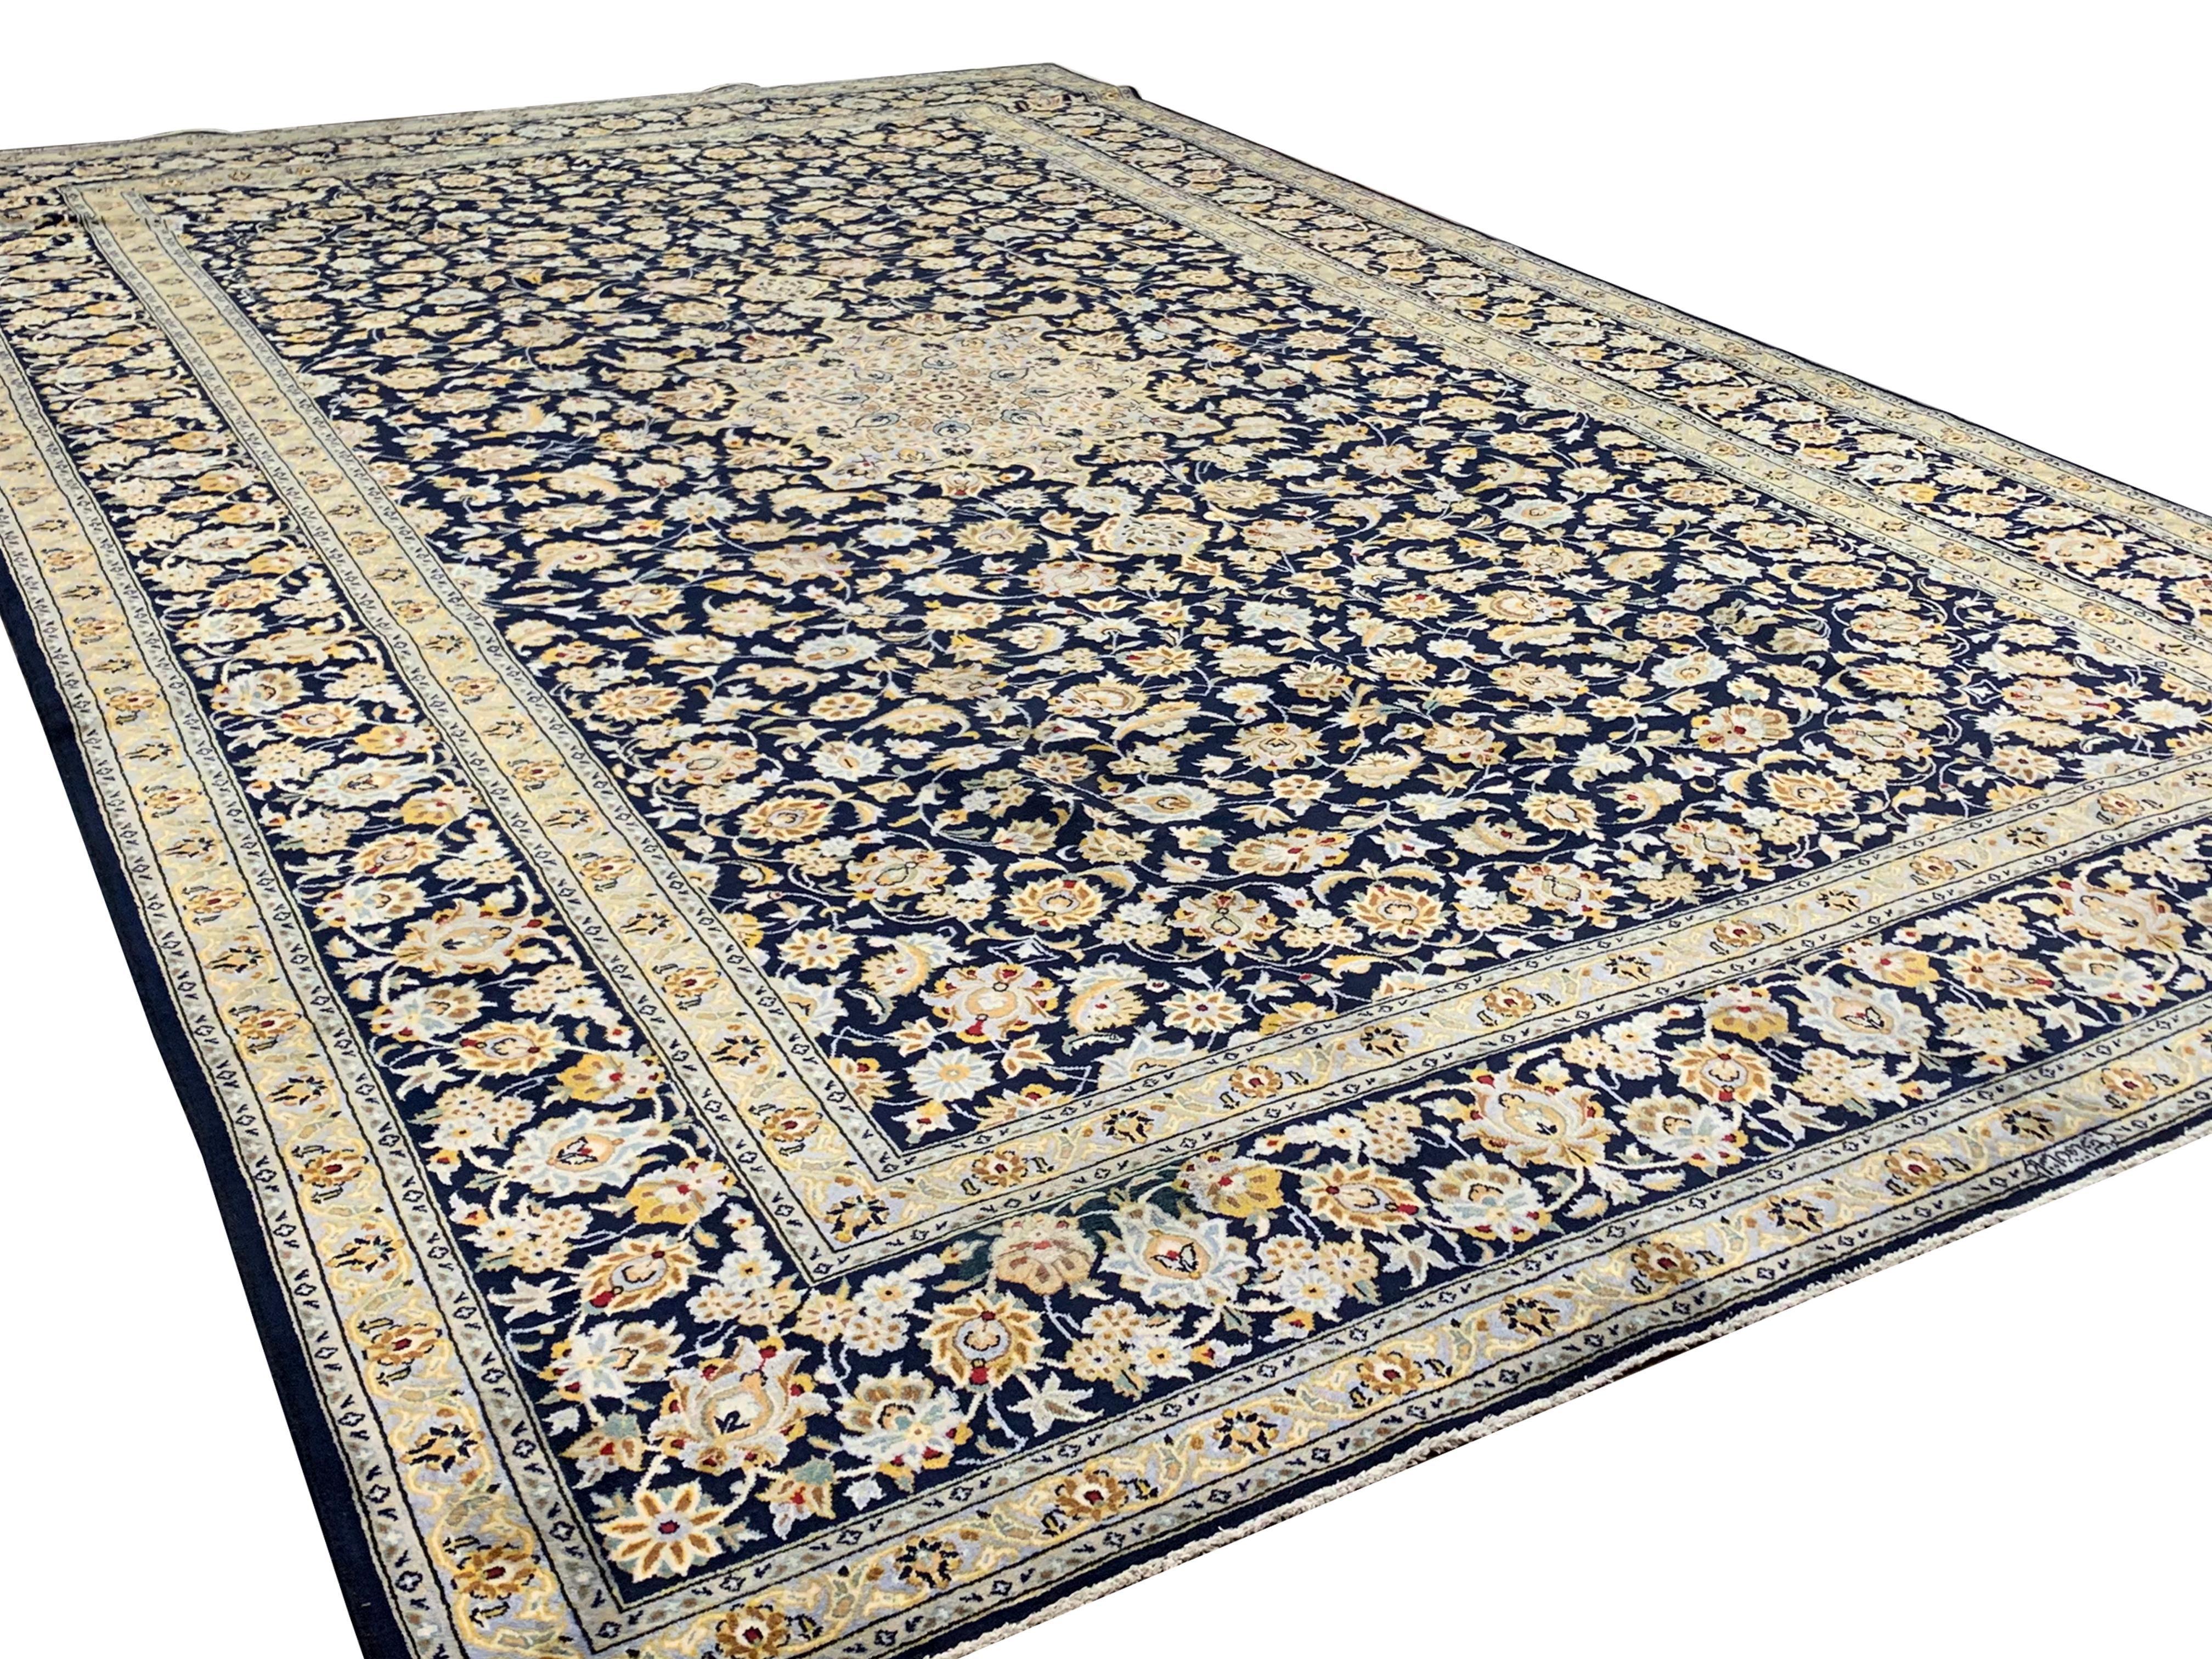 This fine wool area rug has been woven with a traditional oriental design featuring an intricate central medallion with a symmetrical, floral surrounding design. The design has been woven with a deep blue background with accents of cream, beige and